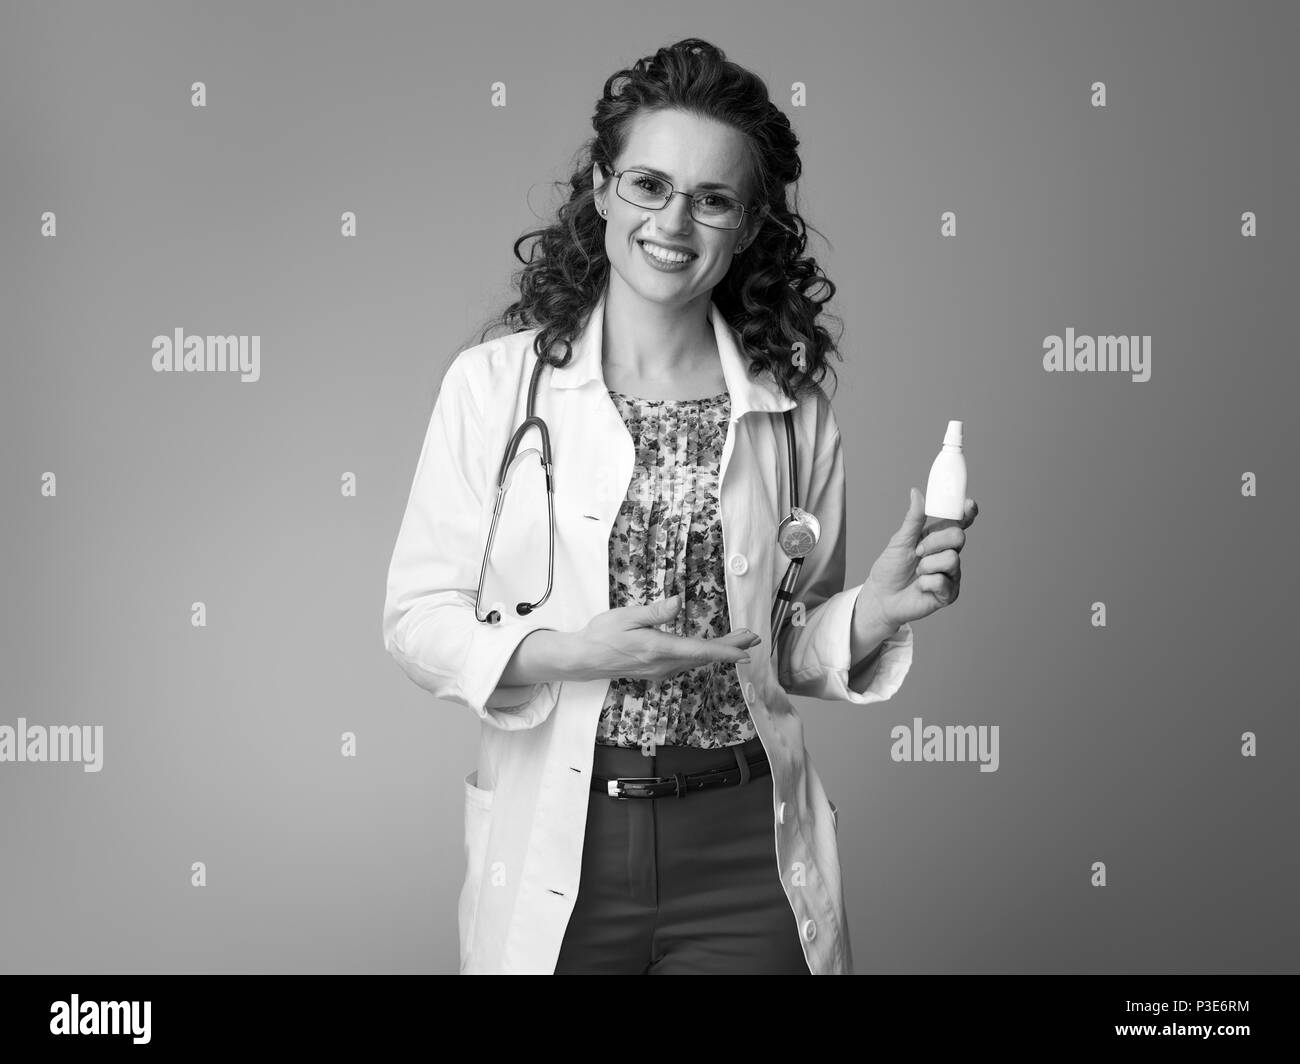 happy pediatrist doctor in white medical robe recommending nasal spray isolated on background Stock Photo